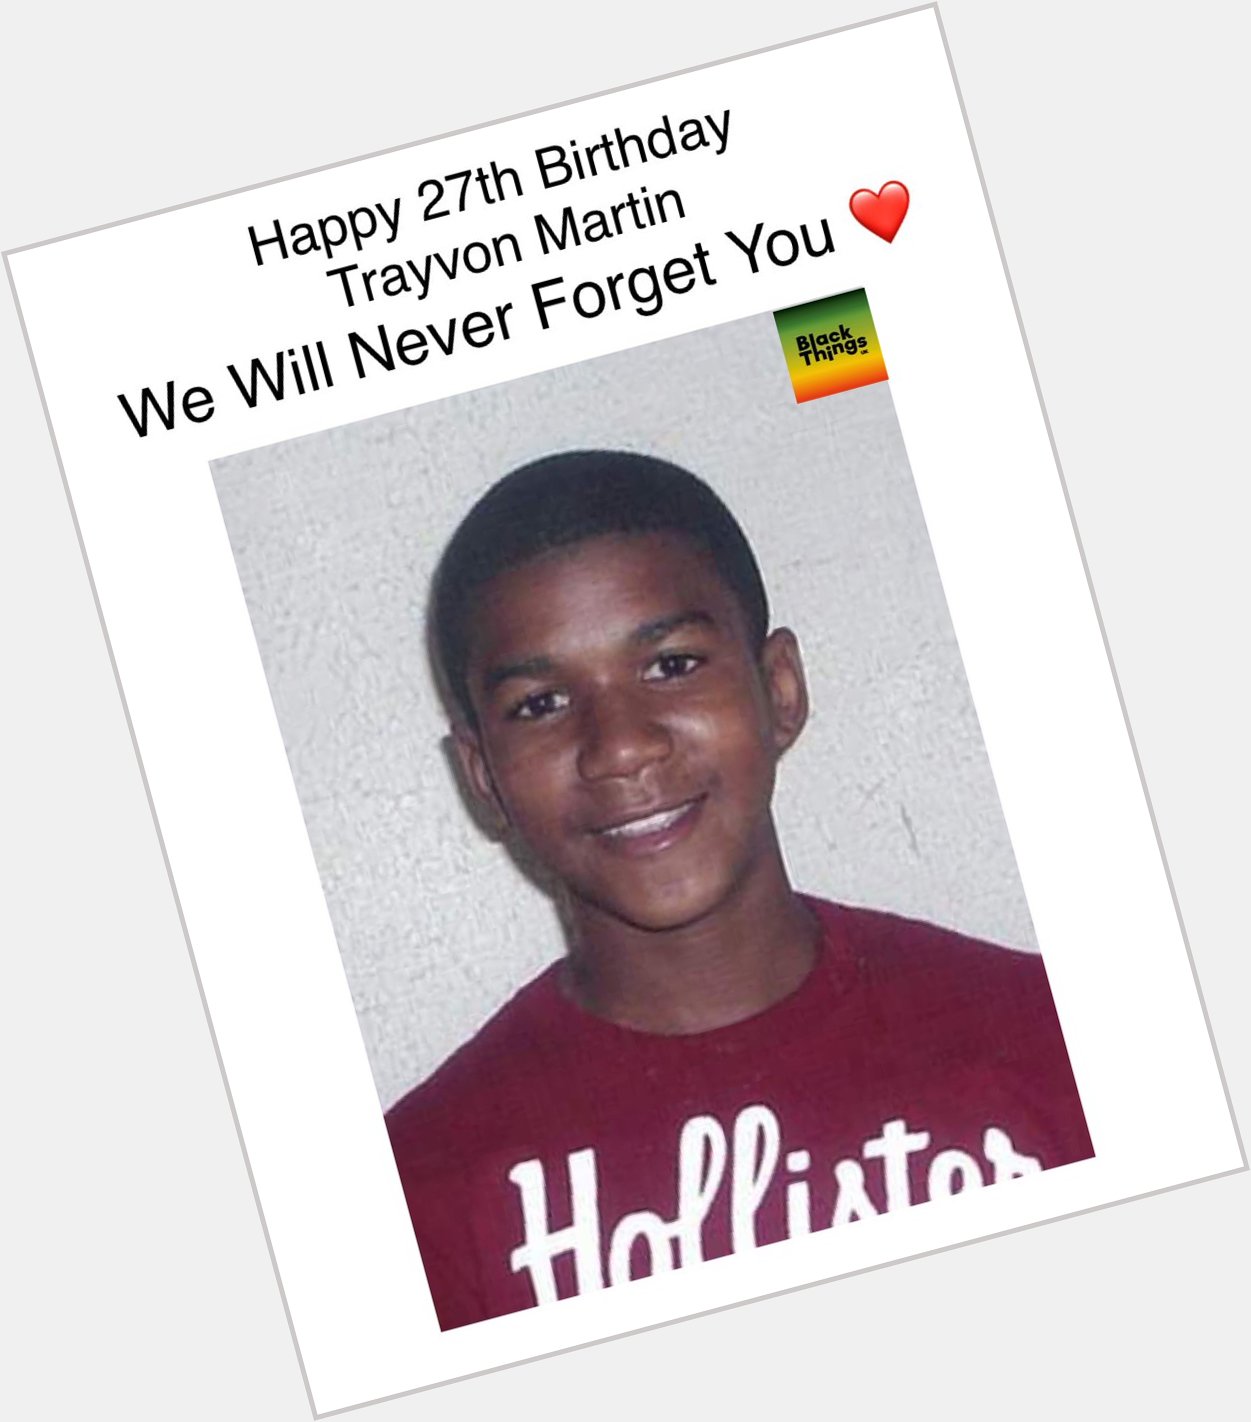 Happy 27th Birthday Trayvon Martin
We Will Never Forget You  